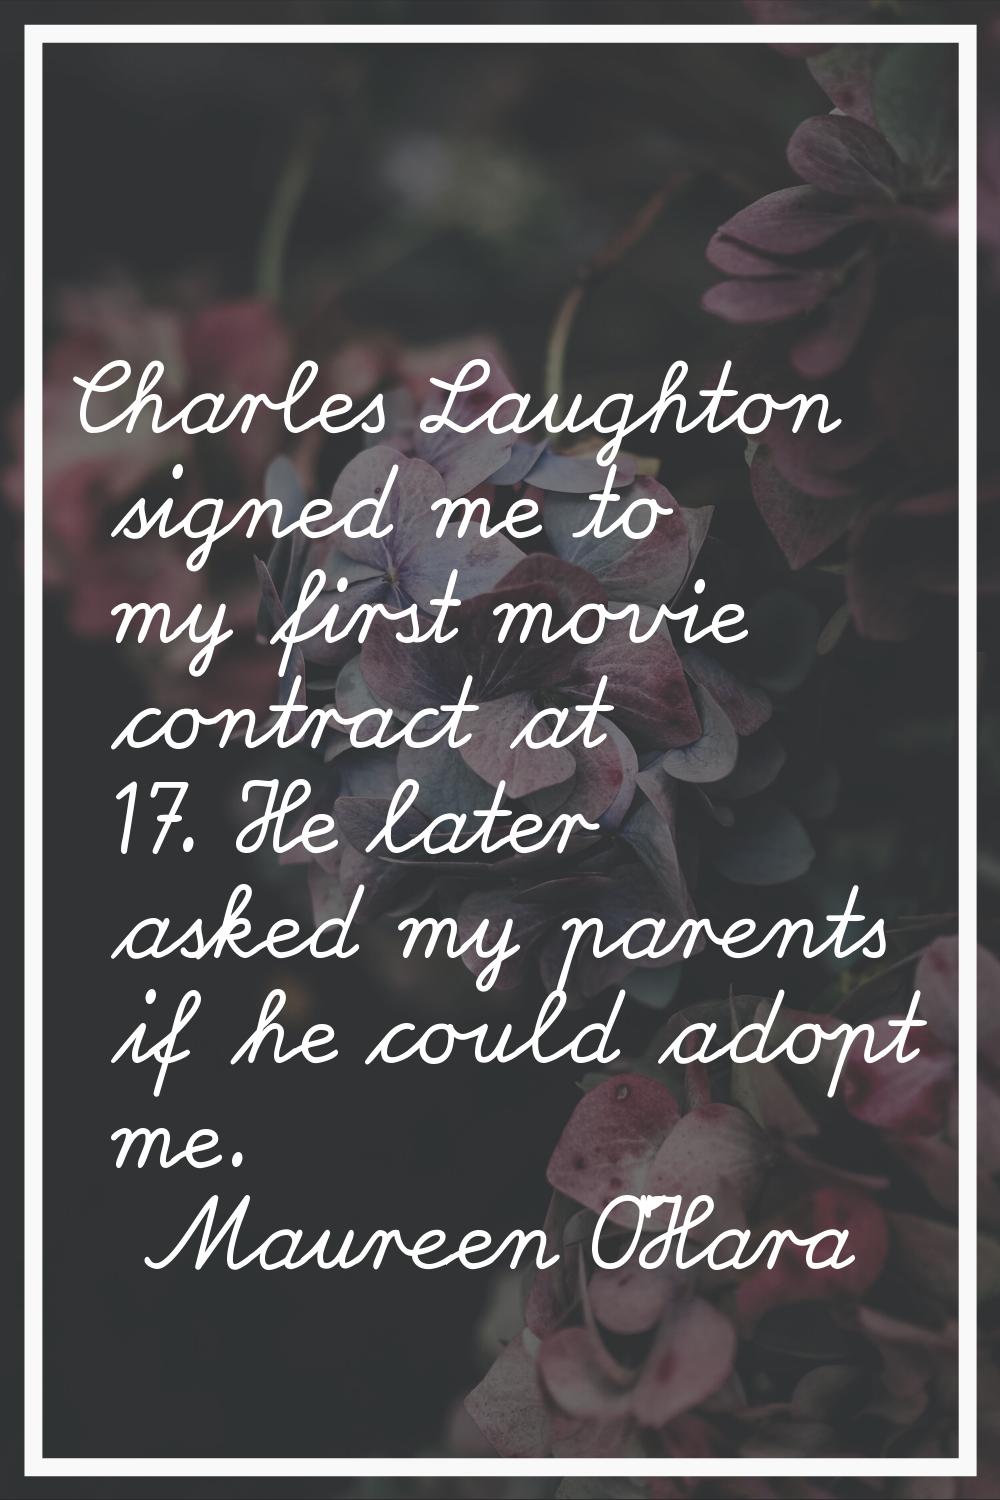 Charles Laughton signed me to my first movie contract at 17. He later asked my parents if he could 